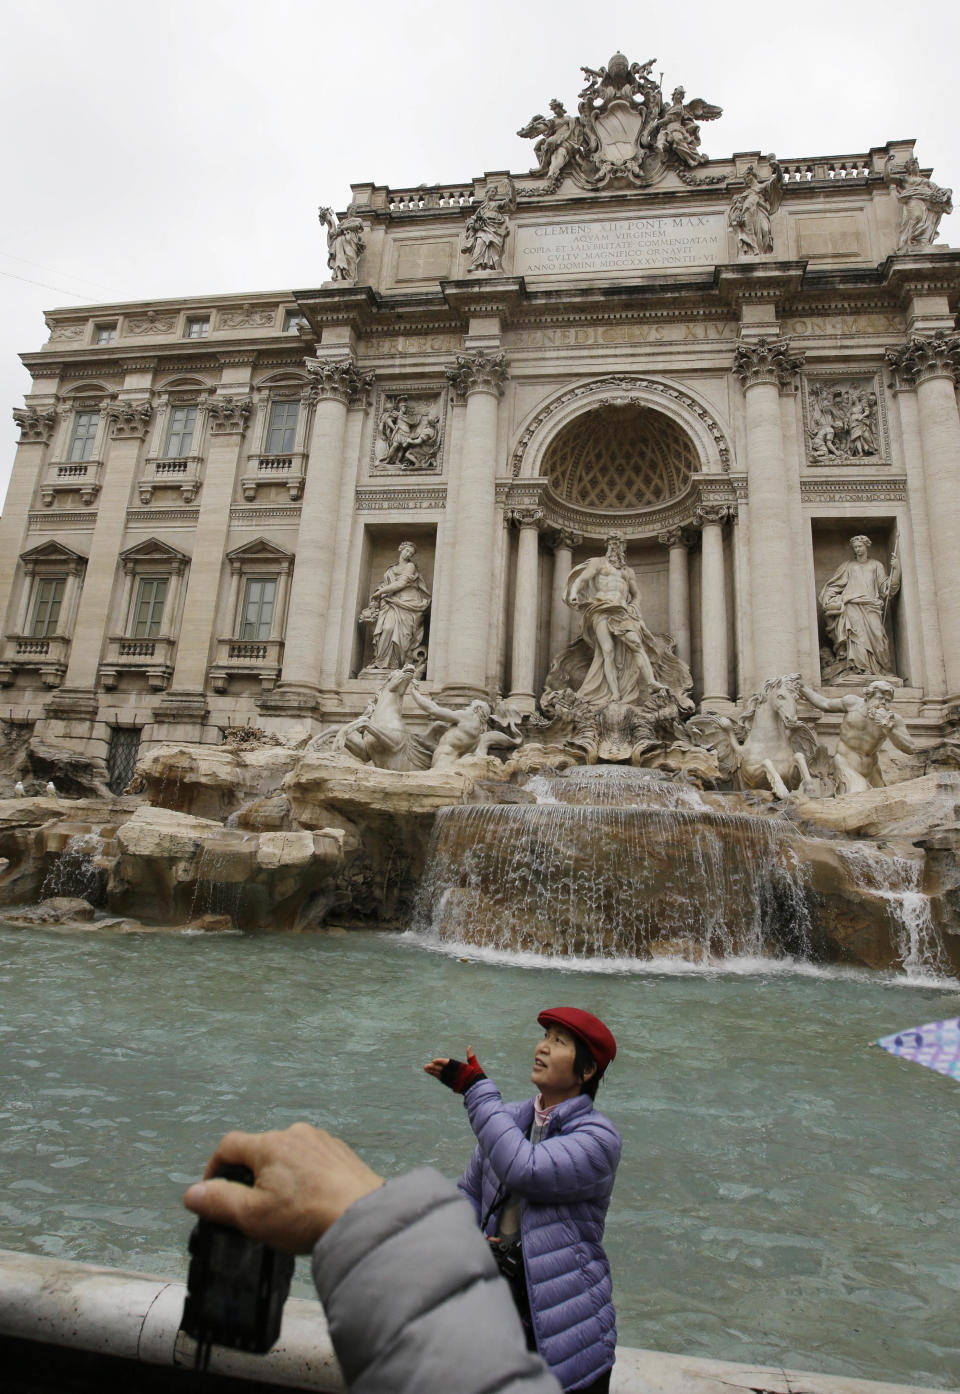 A tourist throws a coin into Trevi's fountain, in Rome, Monday, Jan. 28, 2013. The Fendi fashion house is financing an euro 2.12 million ($2.8 million) restoration of Trevi Fountain in Rome, famed as a setting for the film "La Dolce Vita'' and the place where dreamers leave their coins. The 20-month project on one of the city's most iconic fountains was being unveiled at a city hall press conference Monday. (AP Photo/Gregorio Borgia)